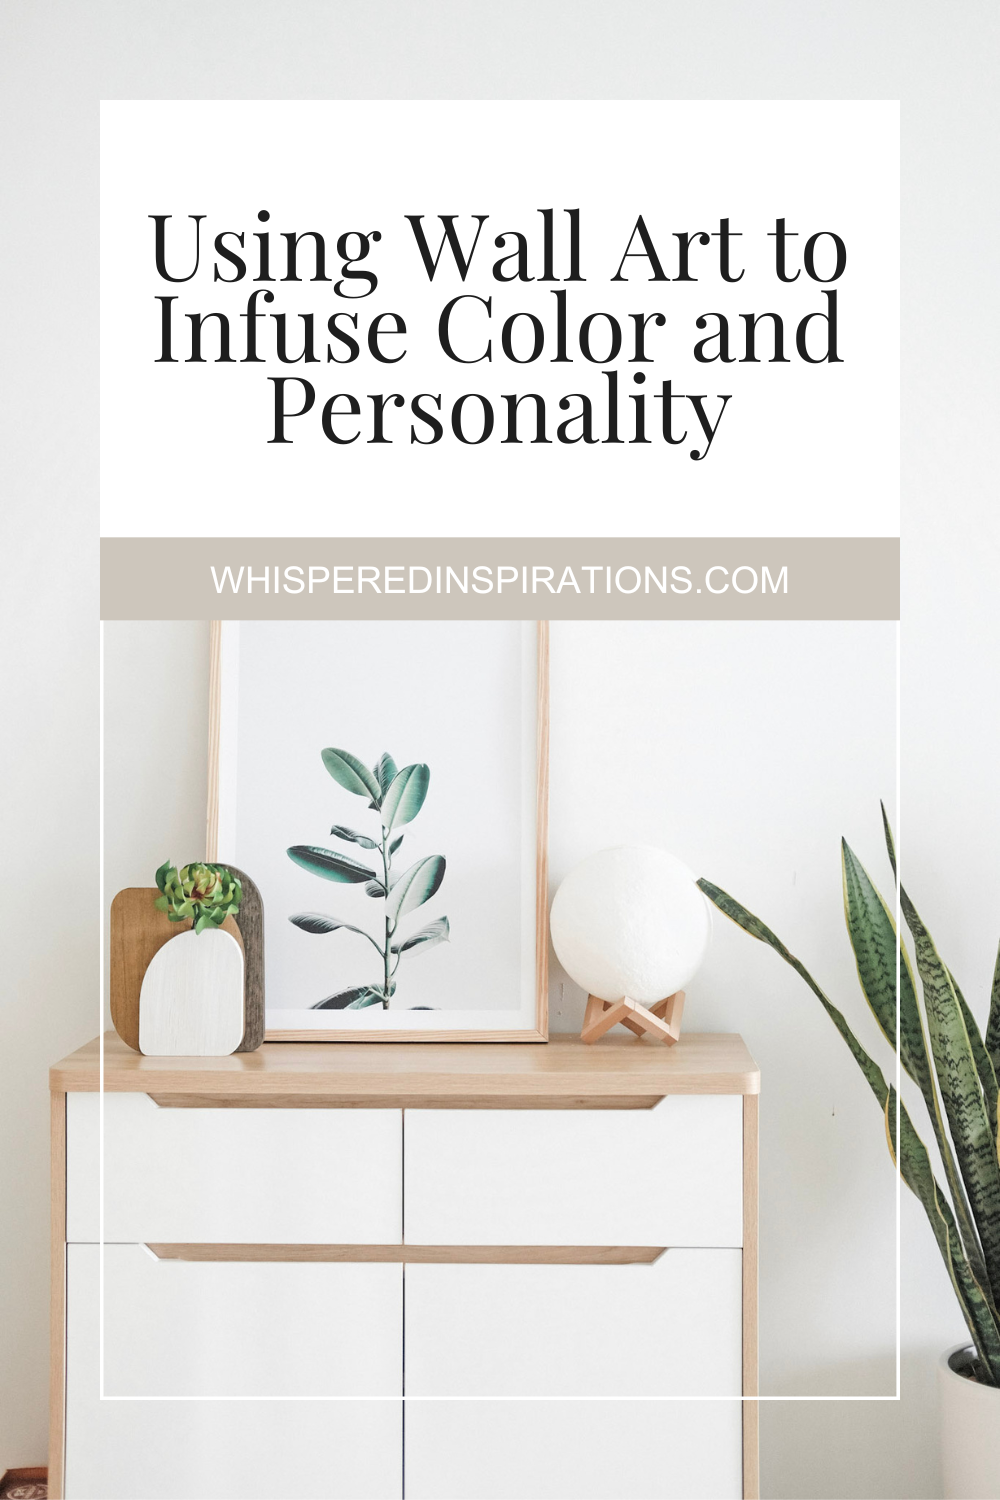 Using Wall Art to Infuse Color and Personality